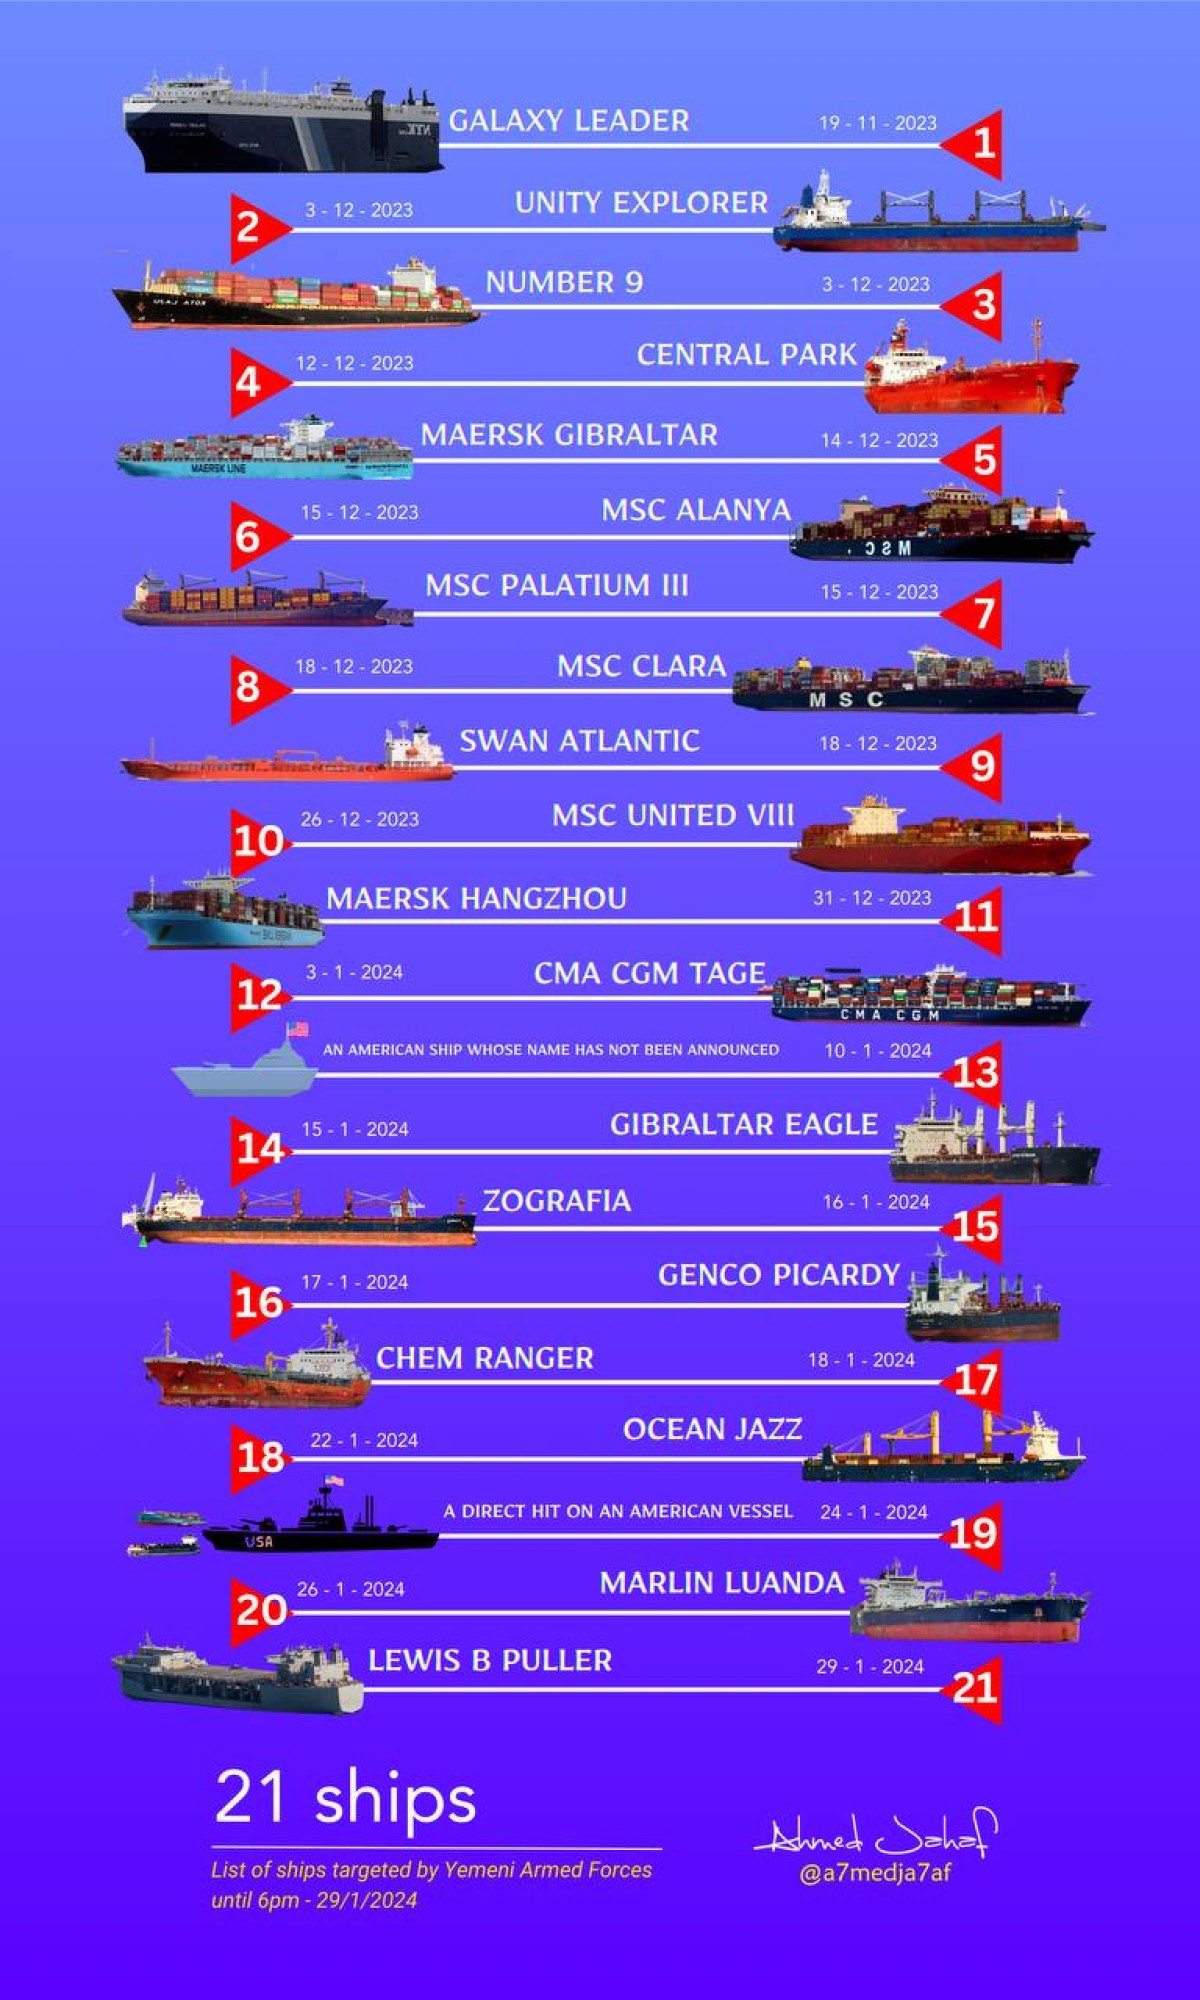 List of ships targeted by Yemeni Armed Forces